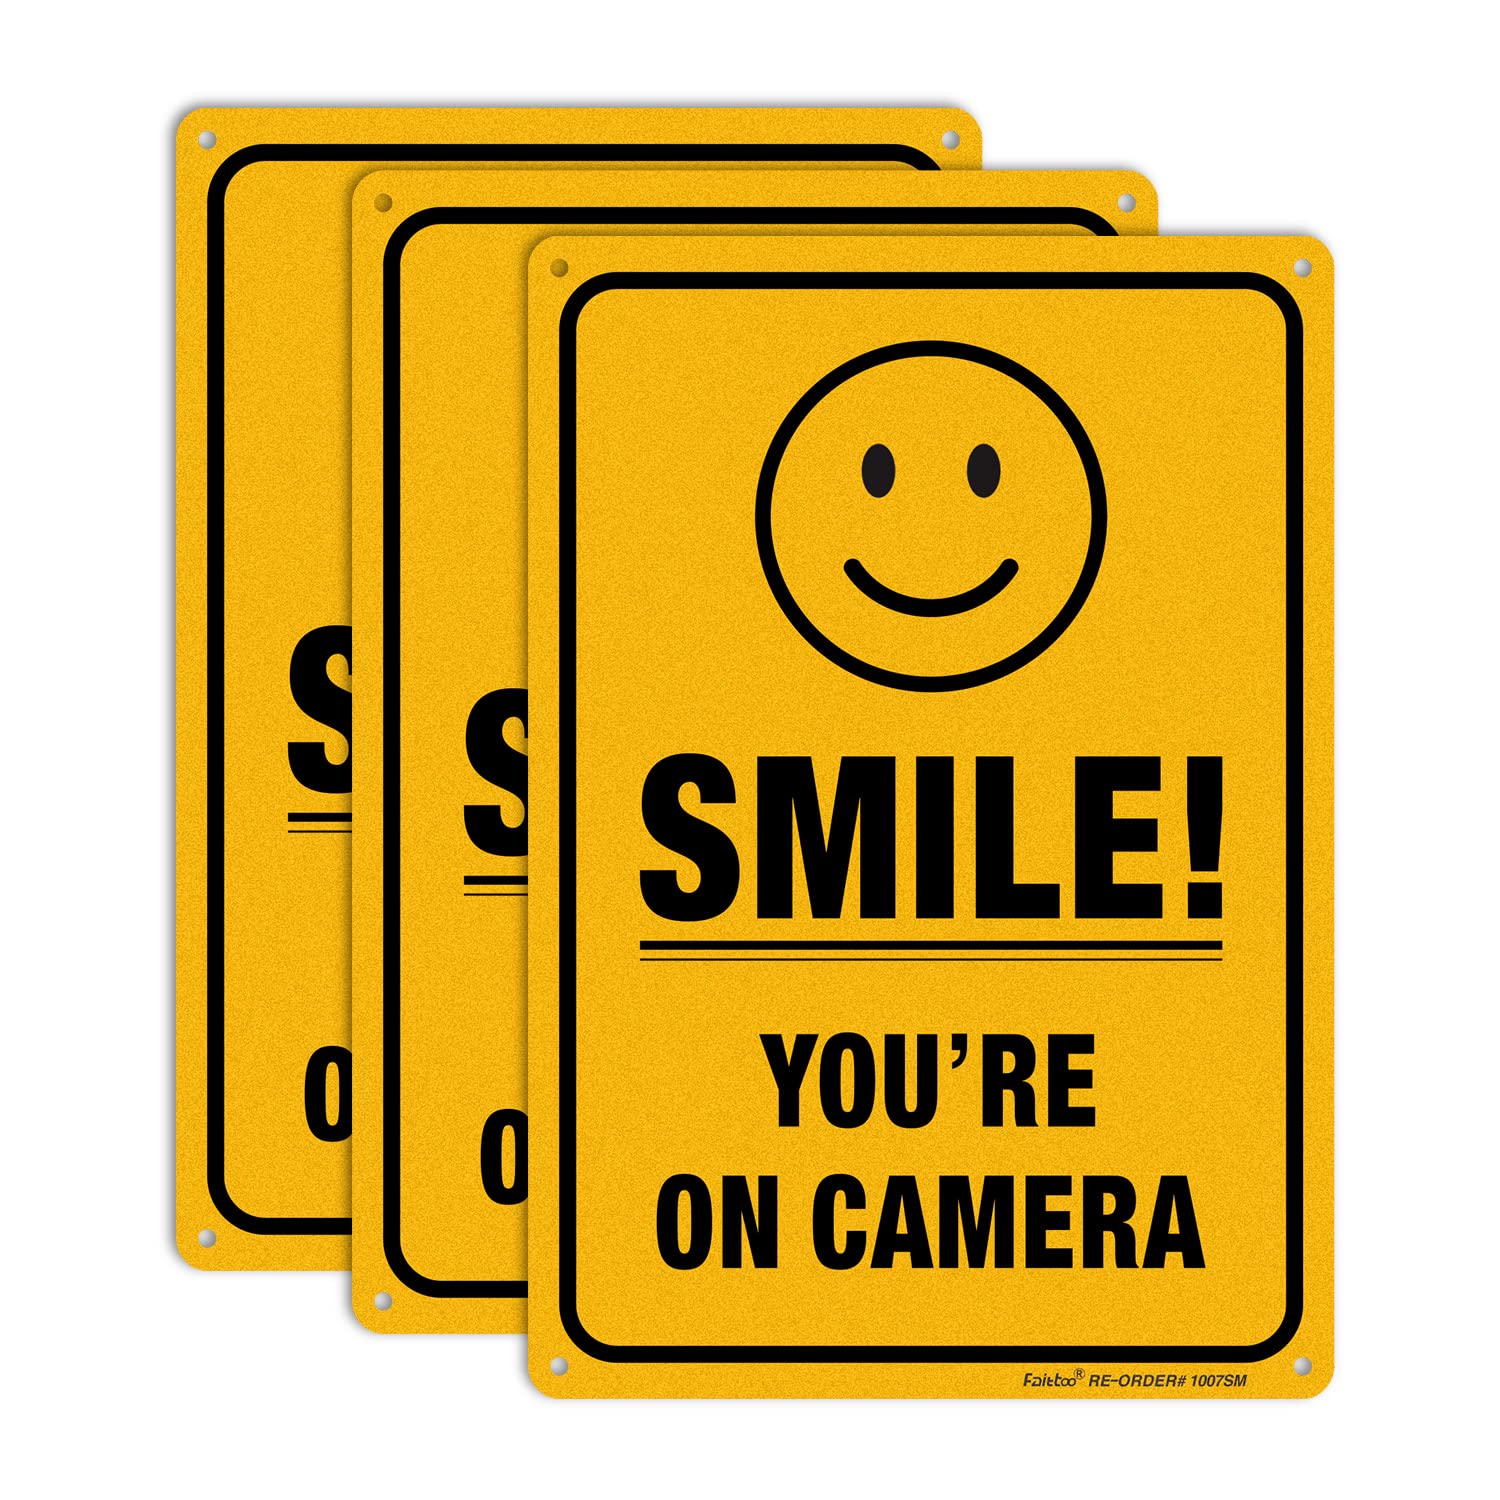 Smile You're On Camera Video Surveillance Sign - 10 x7 Inches .040 Rust Free Heavy Duty Aluminum - Indoor or Outdoor Use for Home Business CCTV Security Camera,UV Protected & Reflective